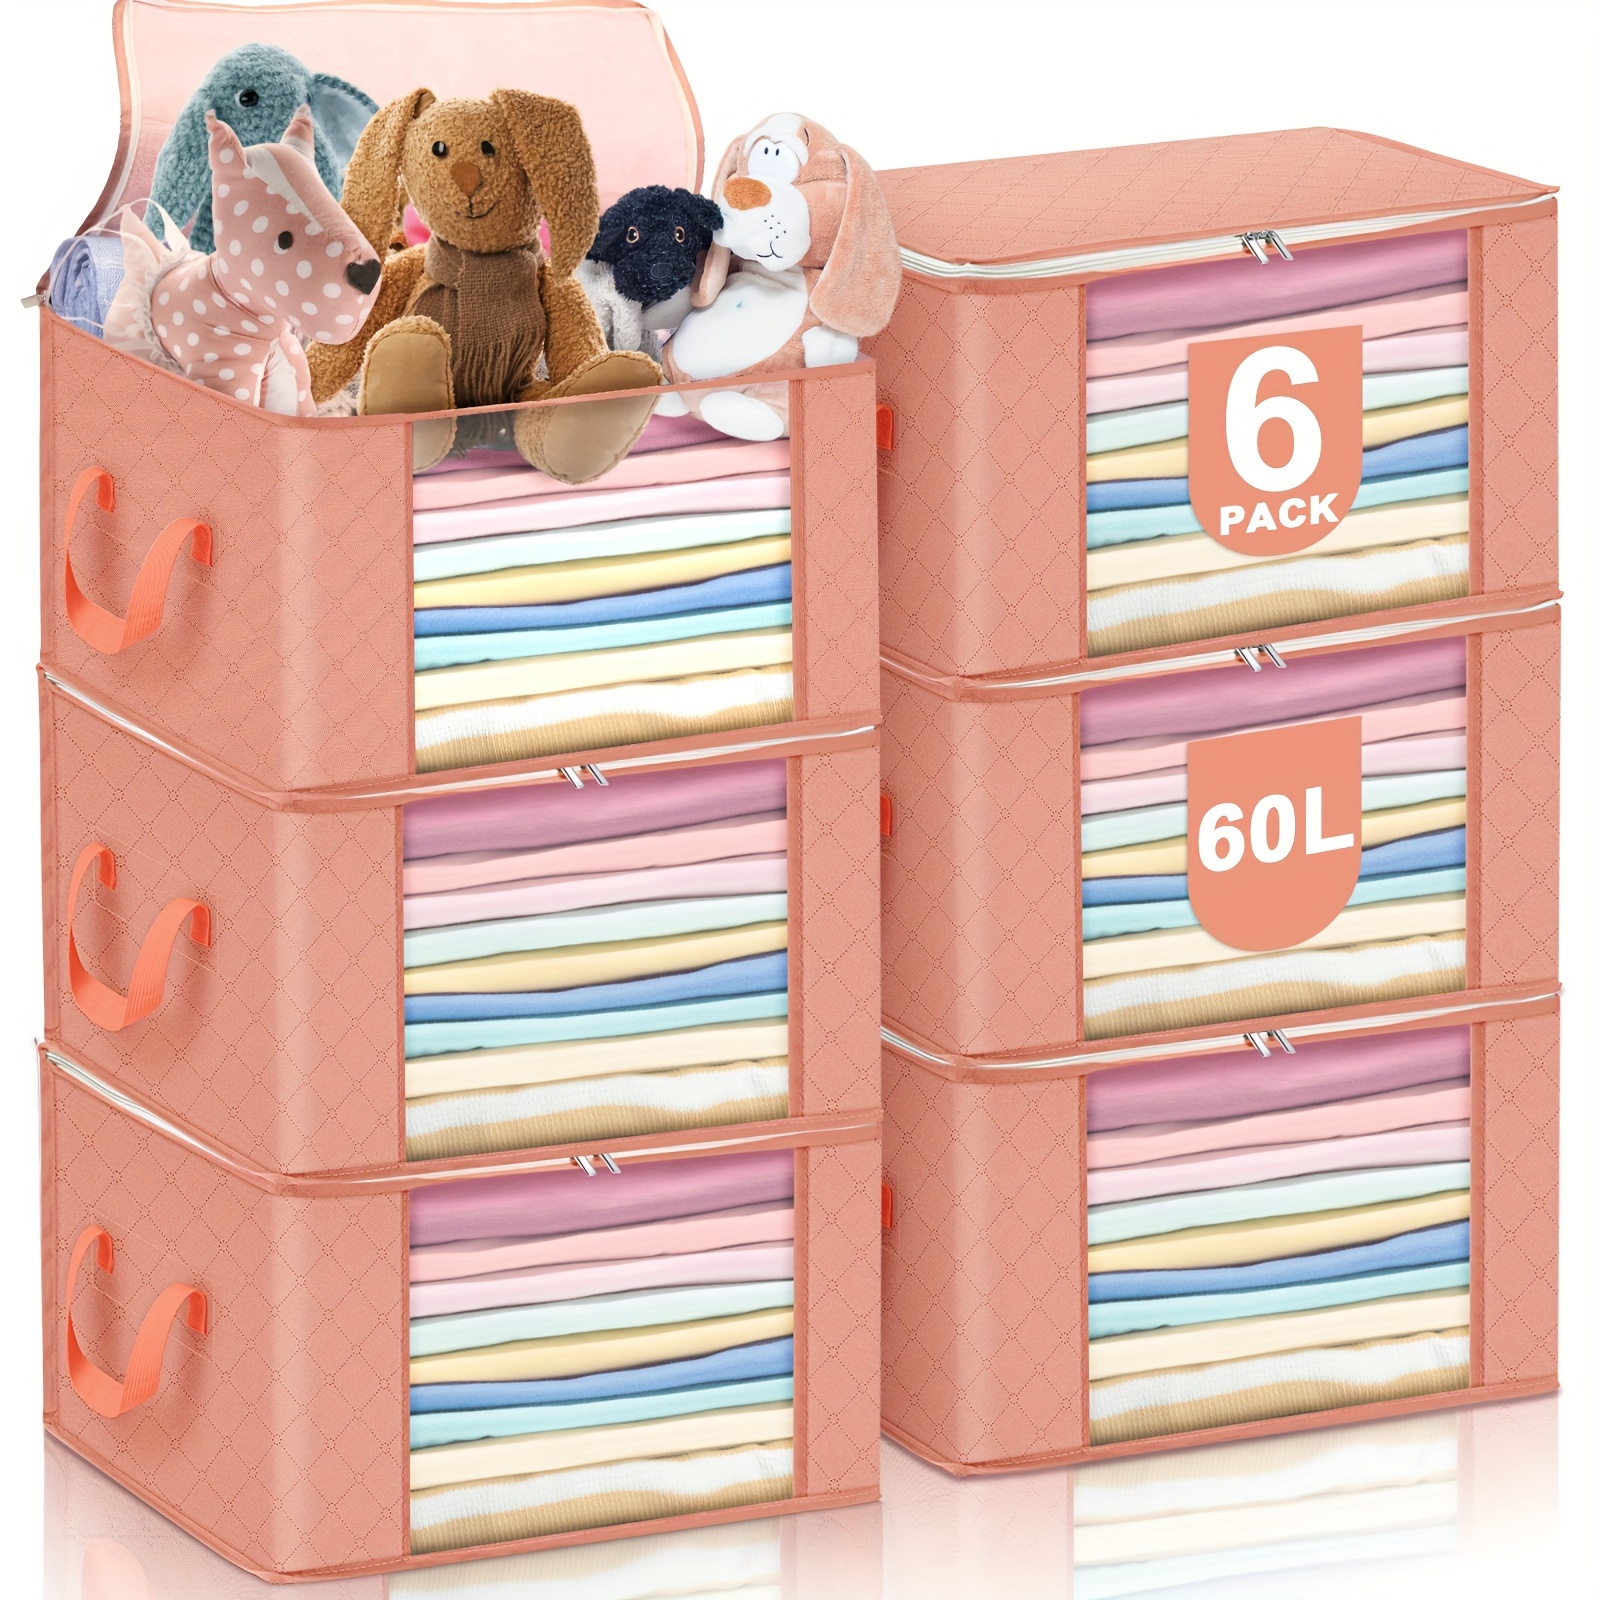 

6 Pack 60l Large Pastel Storage Bag Foldable Storage Bins Container With Handle Zipper Organized Stuffed Toys Seasonal Clothes Bed Blanket Sheet Pillow For Kids Room (peach)